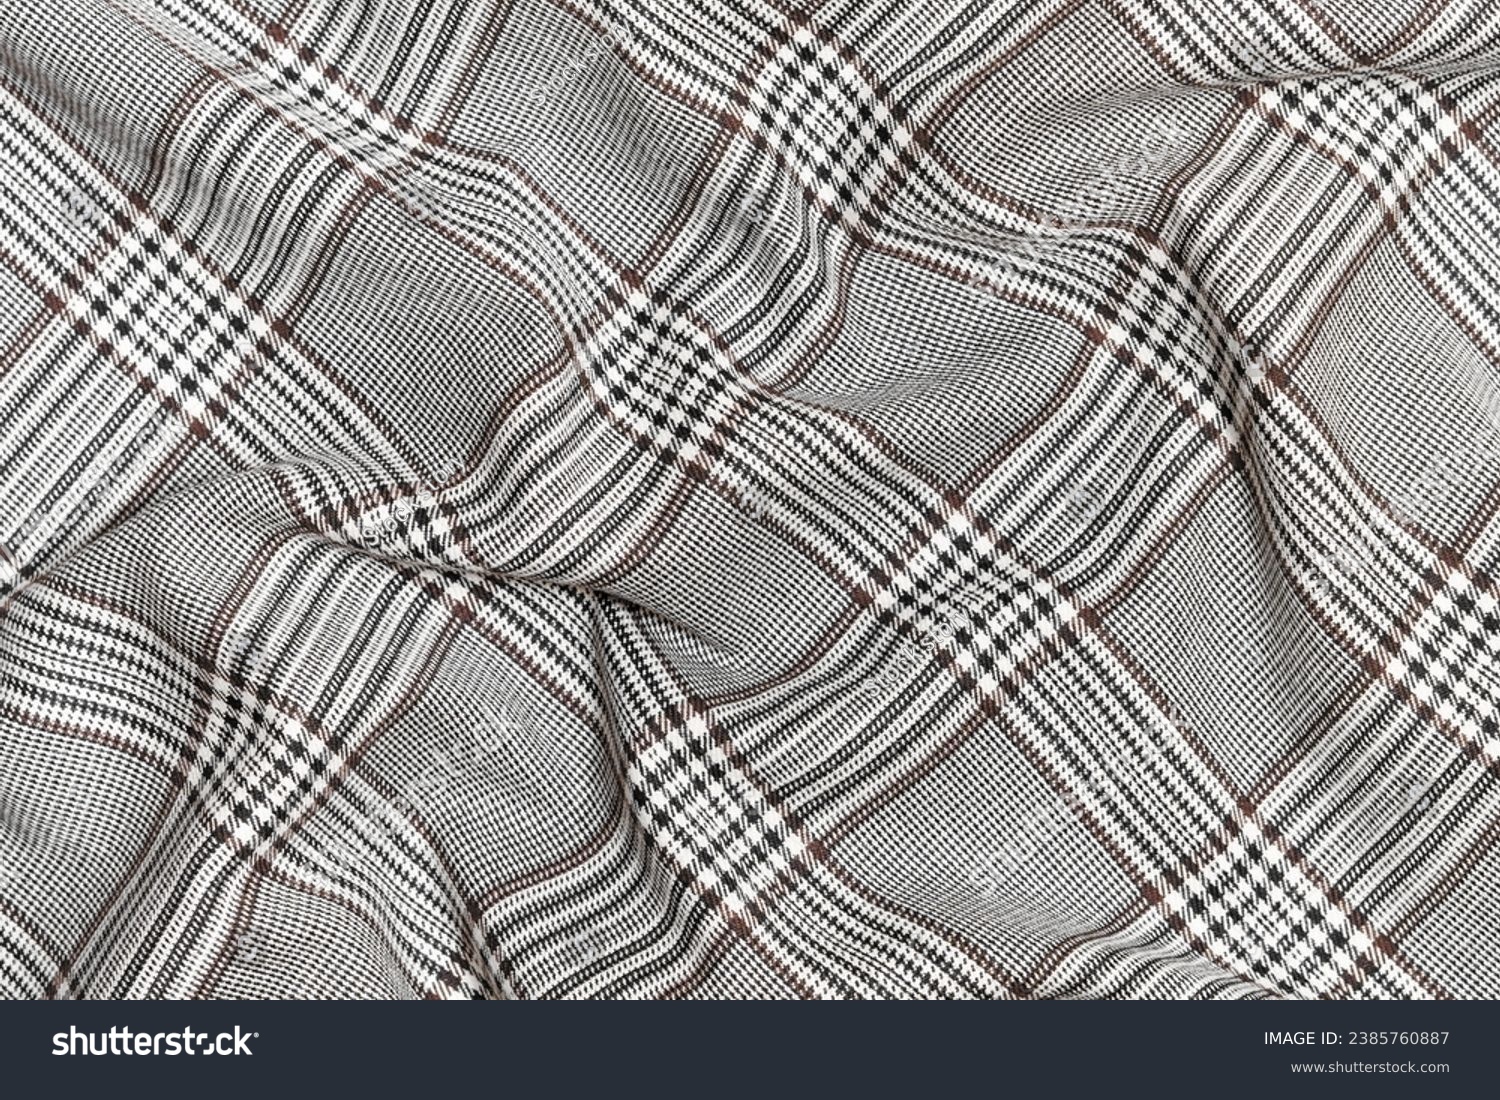 Crumpled, wrinkled fabric of black and brown colors in tartan check close-up. Traditional Scottish clothing. place for your design #2385760887